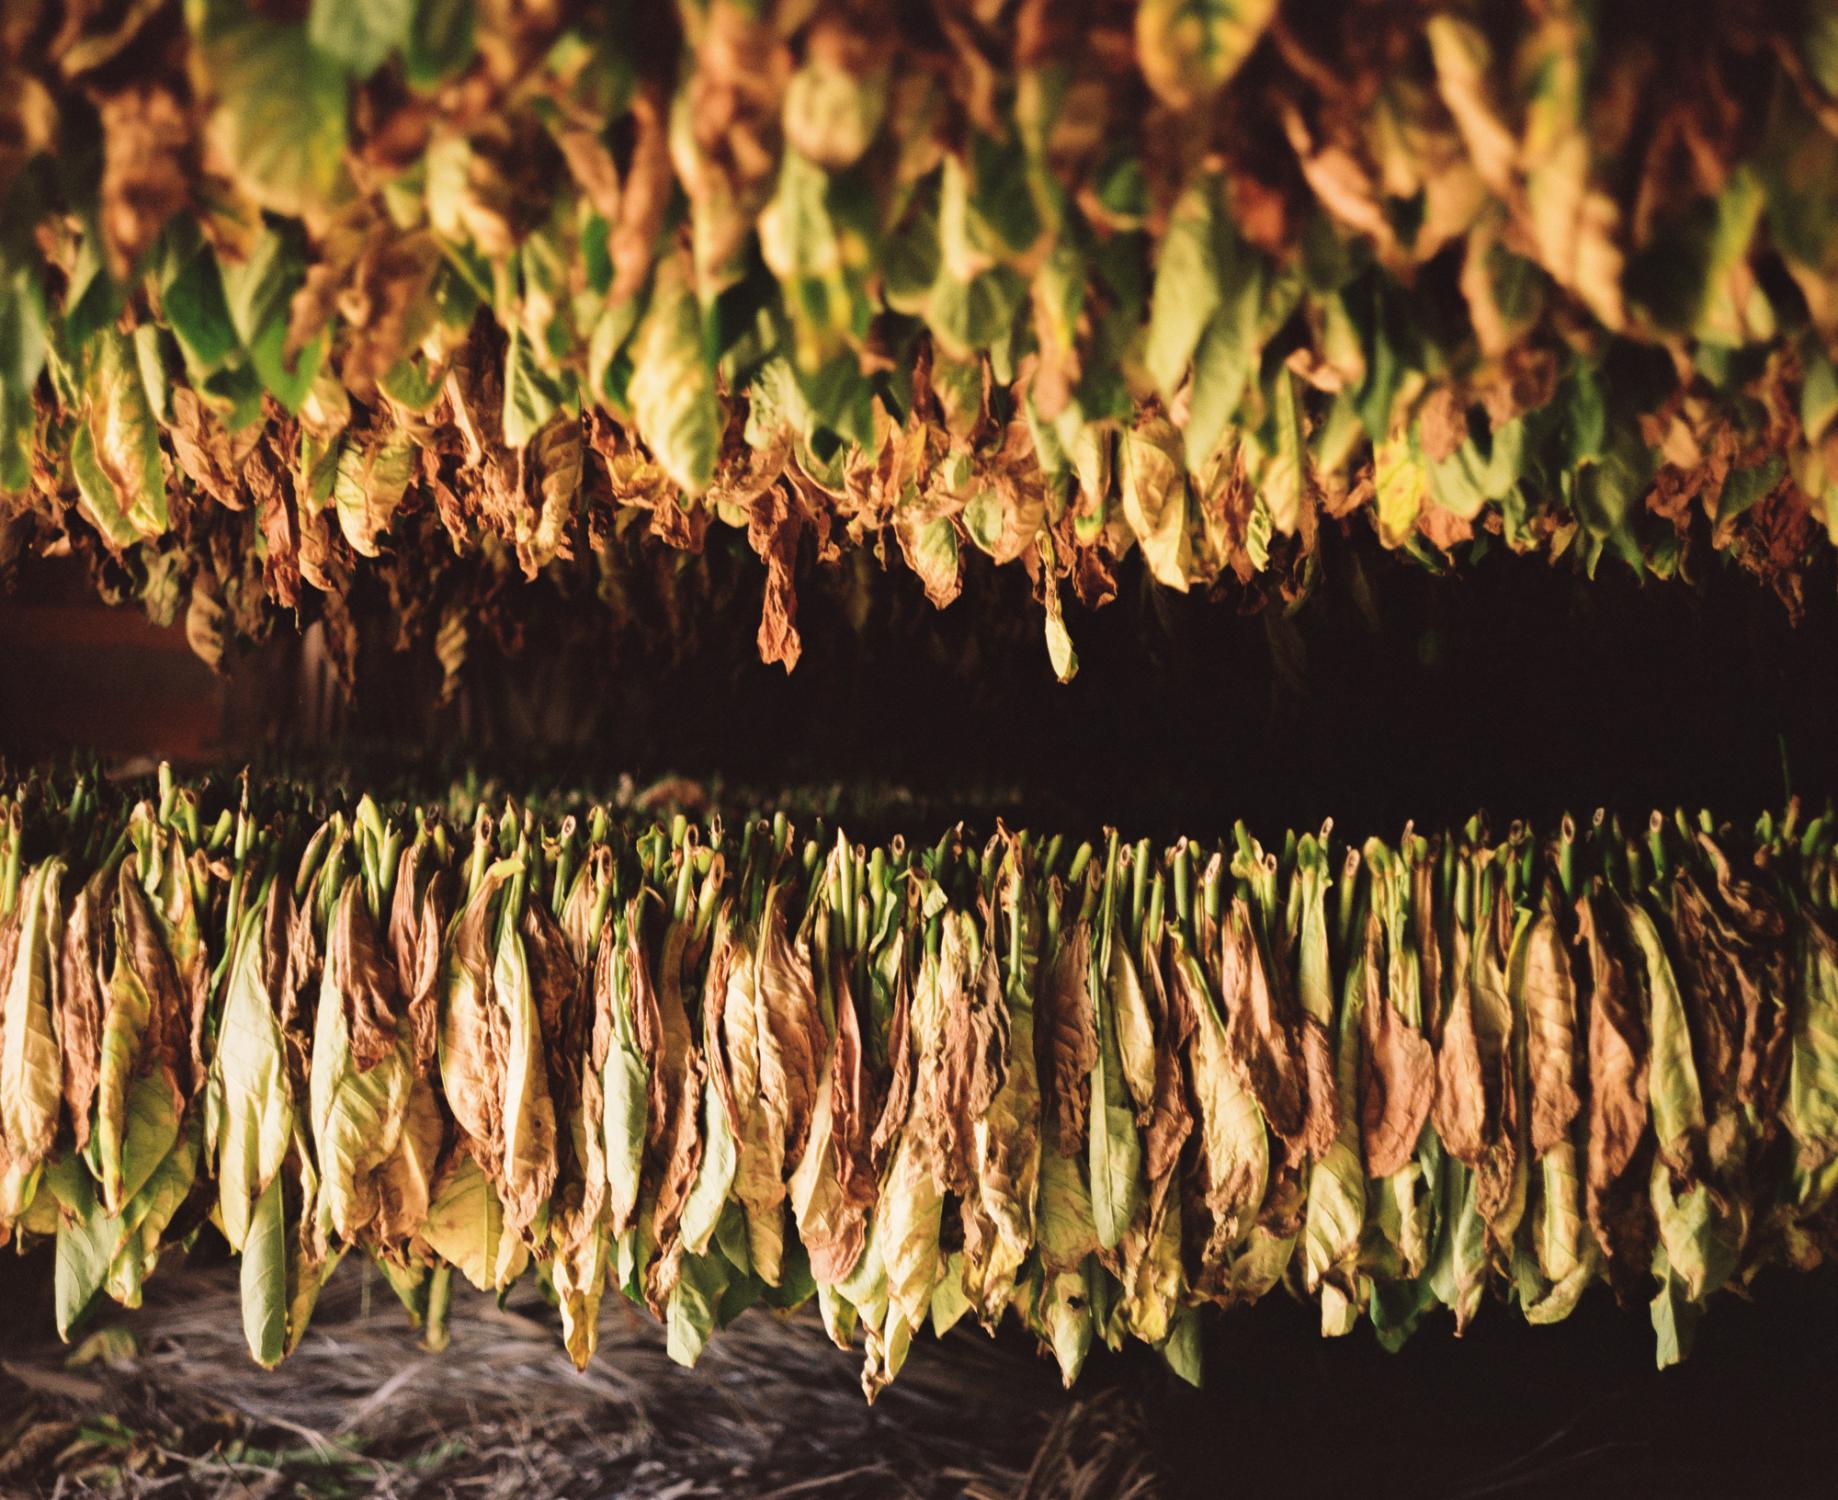 Tobaccoland - VIÑALES.  Tobacco leaves held together by string...